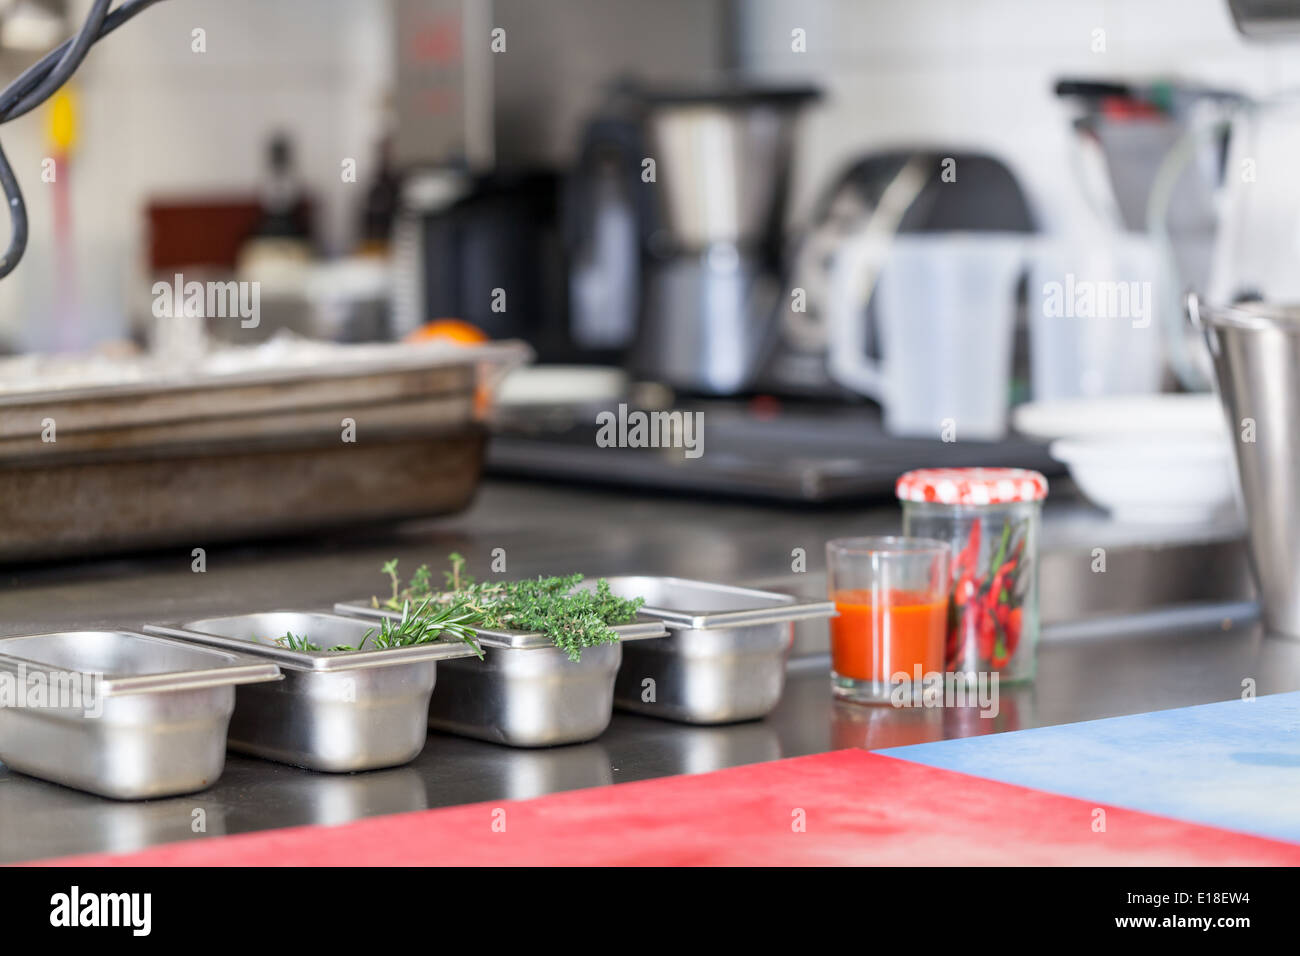 Neat interior of a commercial kitchen with wall mounted utensils and a range of different stainless steel pots arranged on a central gas hob Stock Photo